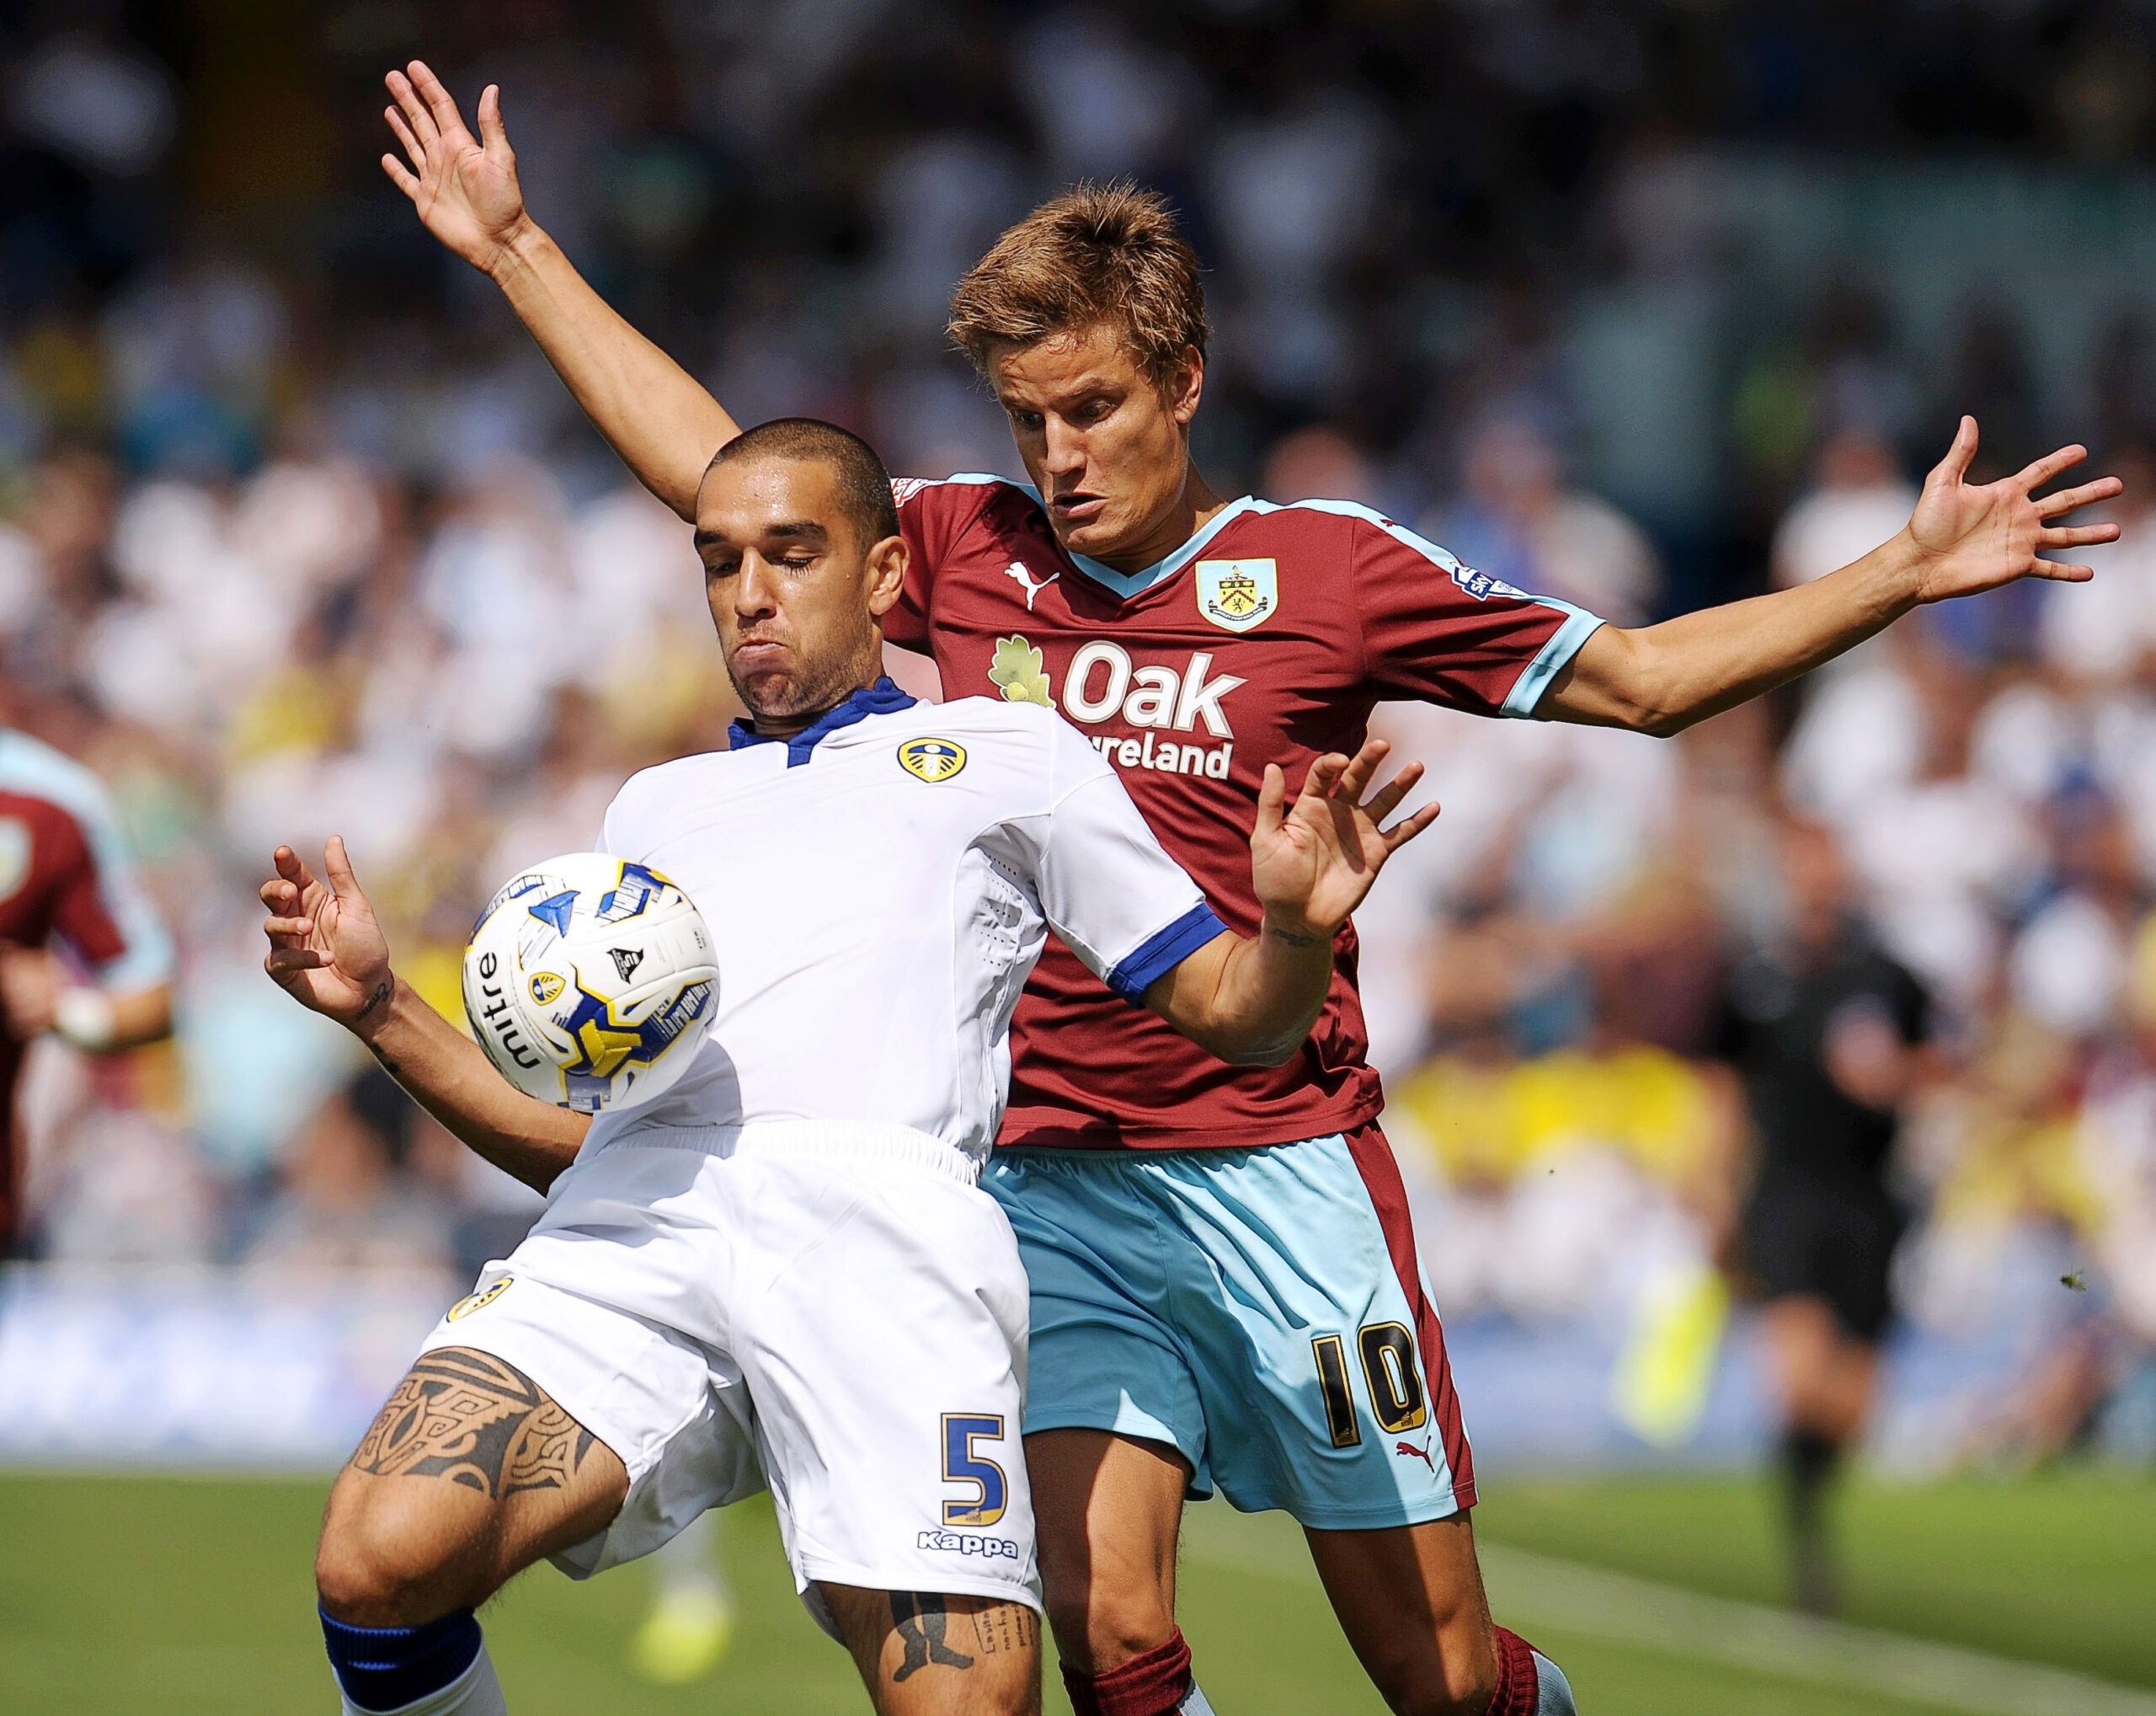 Football - Leeds United v Burnley - Sky Bet Football League Championship - Elland Road - 8/8/15 
Leeds United's Giuseppe Bellusci and Burnley's Jelle Vossen in action 
Mandatory Credit: Action Images / Paul Burrows 
Livepic 
EDITORIAL USE ONLY. No use with unauthorized audio, video, data, fixture lists, club/league logos or 